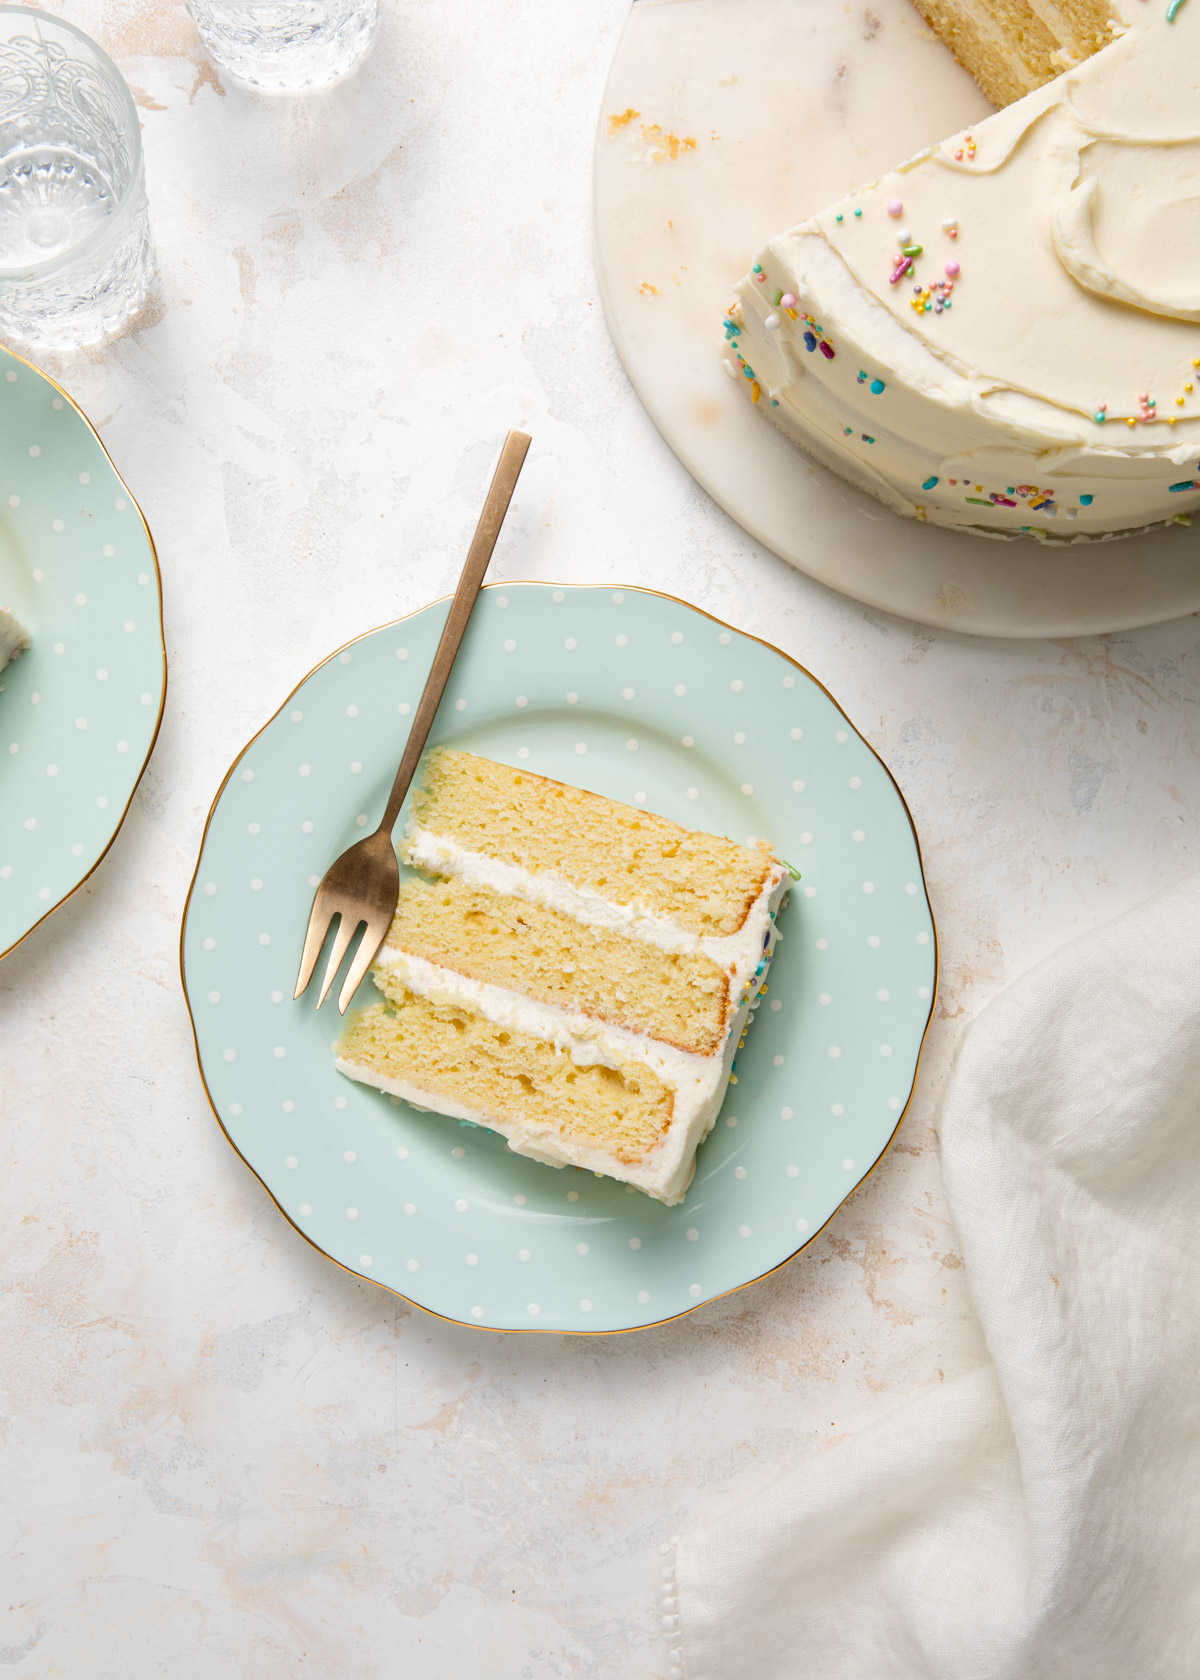 A turquoise plate with a slice of yellow cake and buttercream frosting